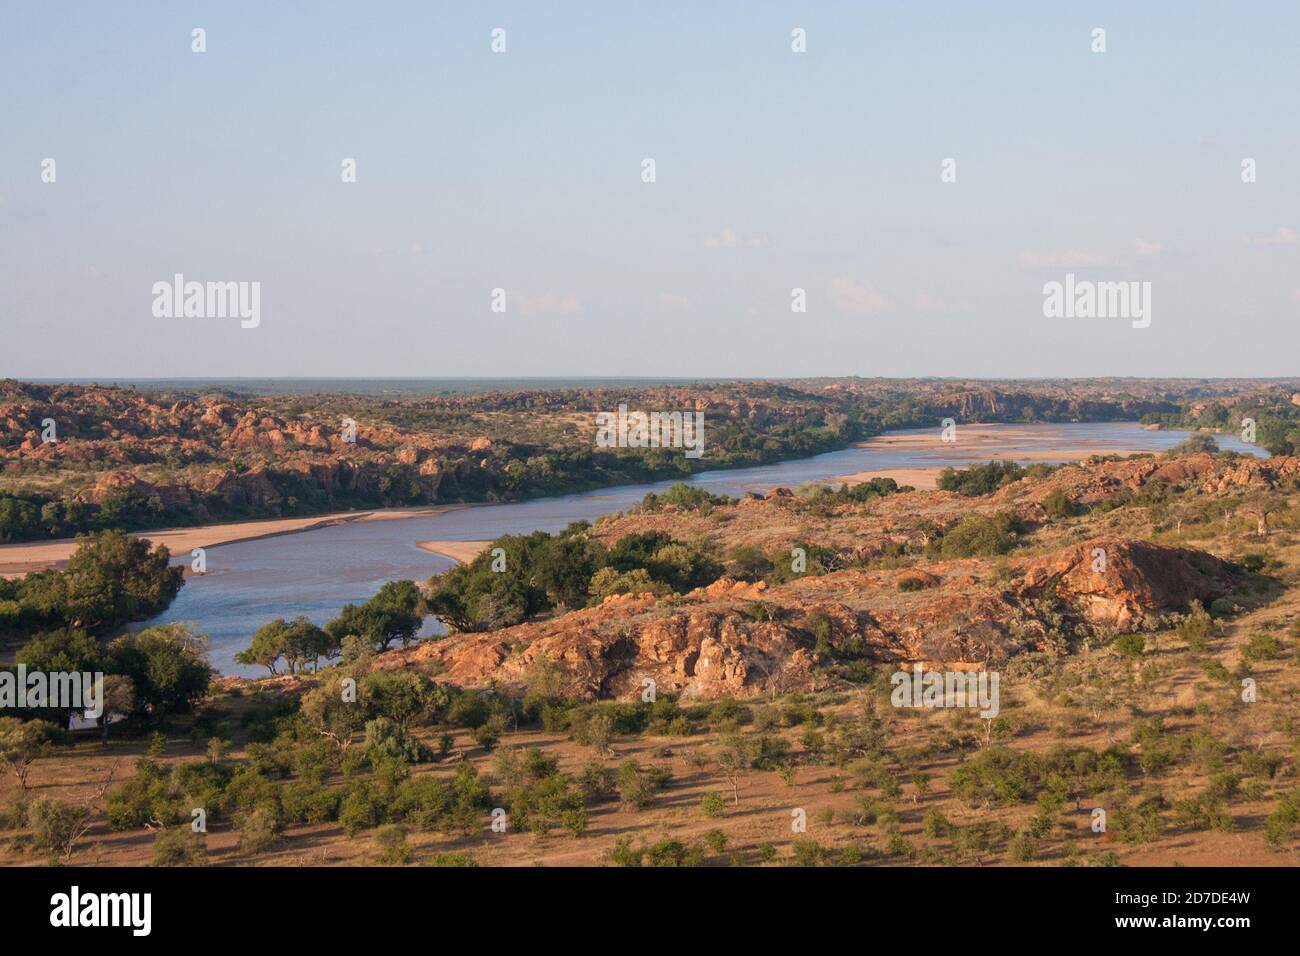 Landscape View of the Limpopo River at Mapungubwe National Park South Africa Stock Photo